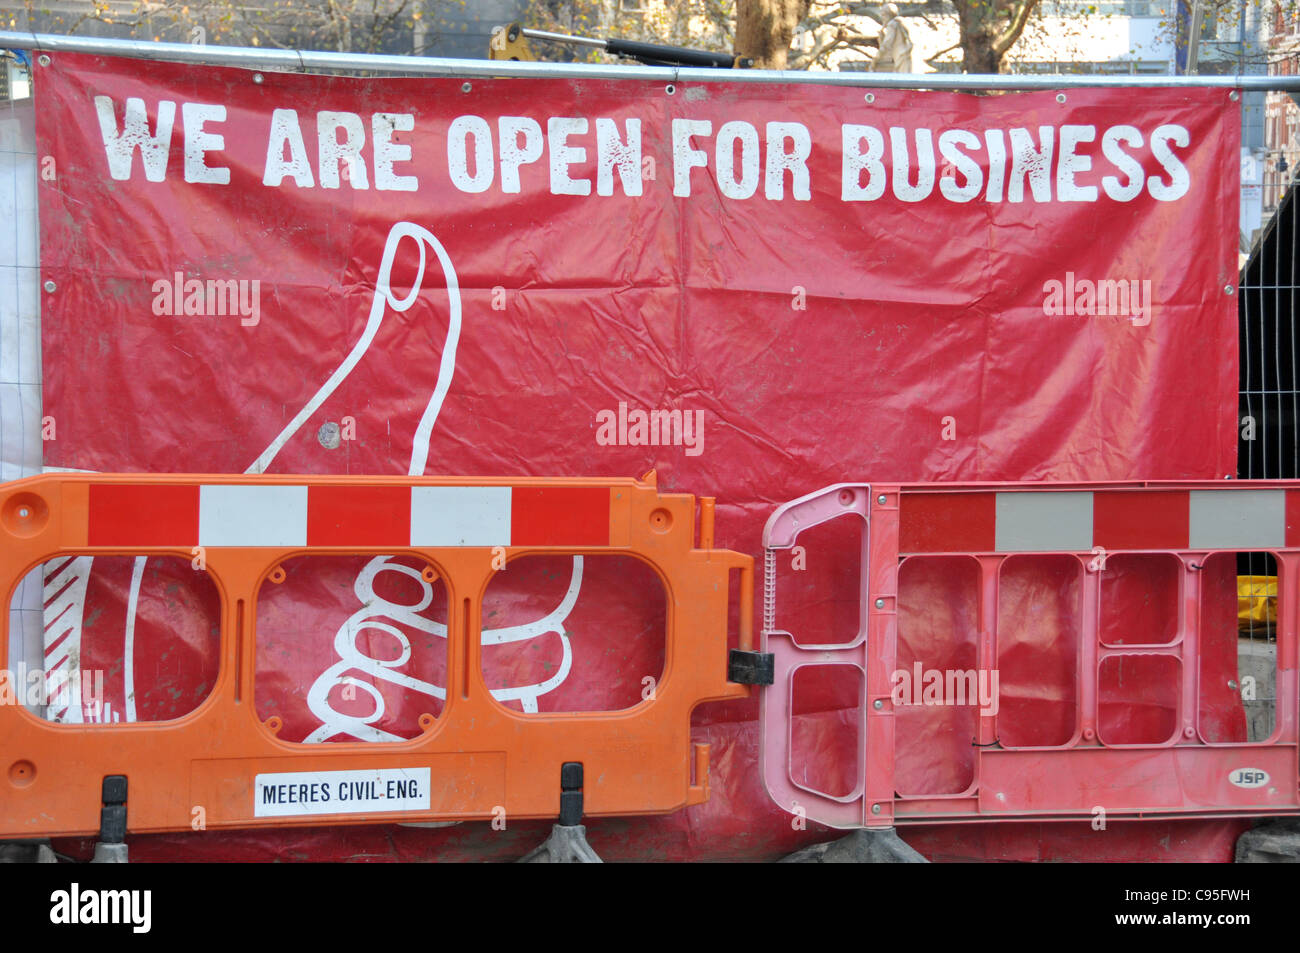 We are open for business ironic sign thumbs up optimistic recession Stock Photo